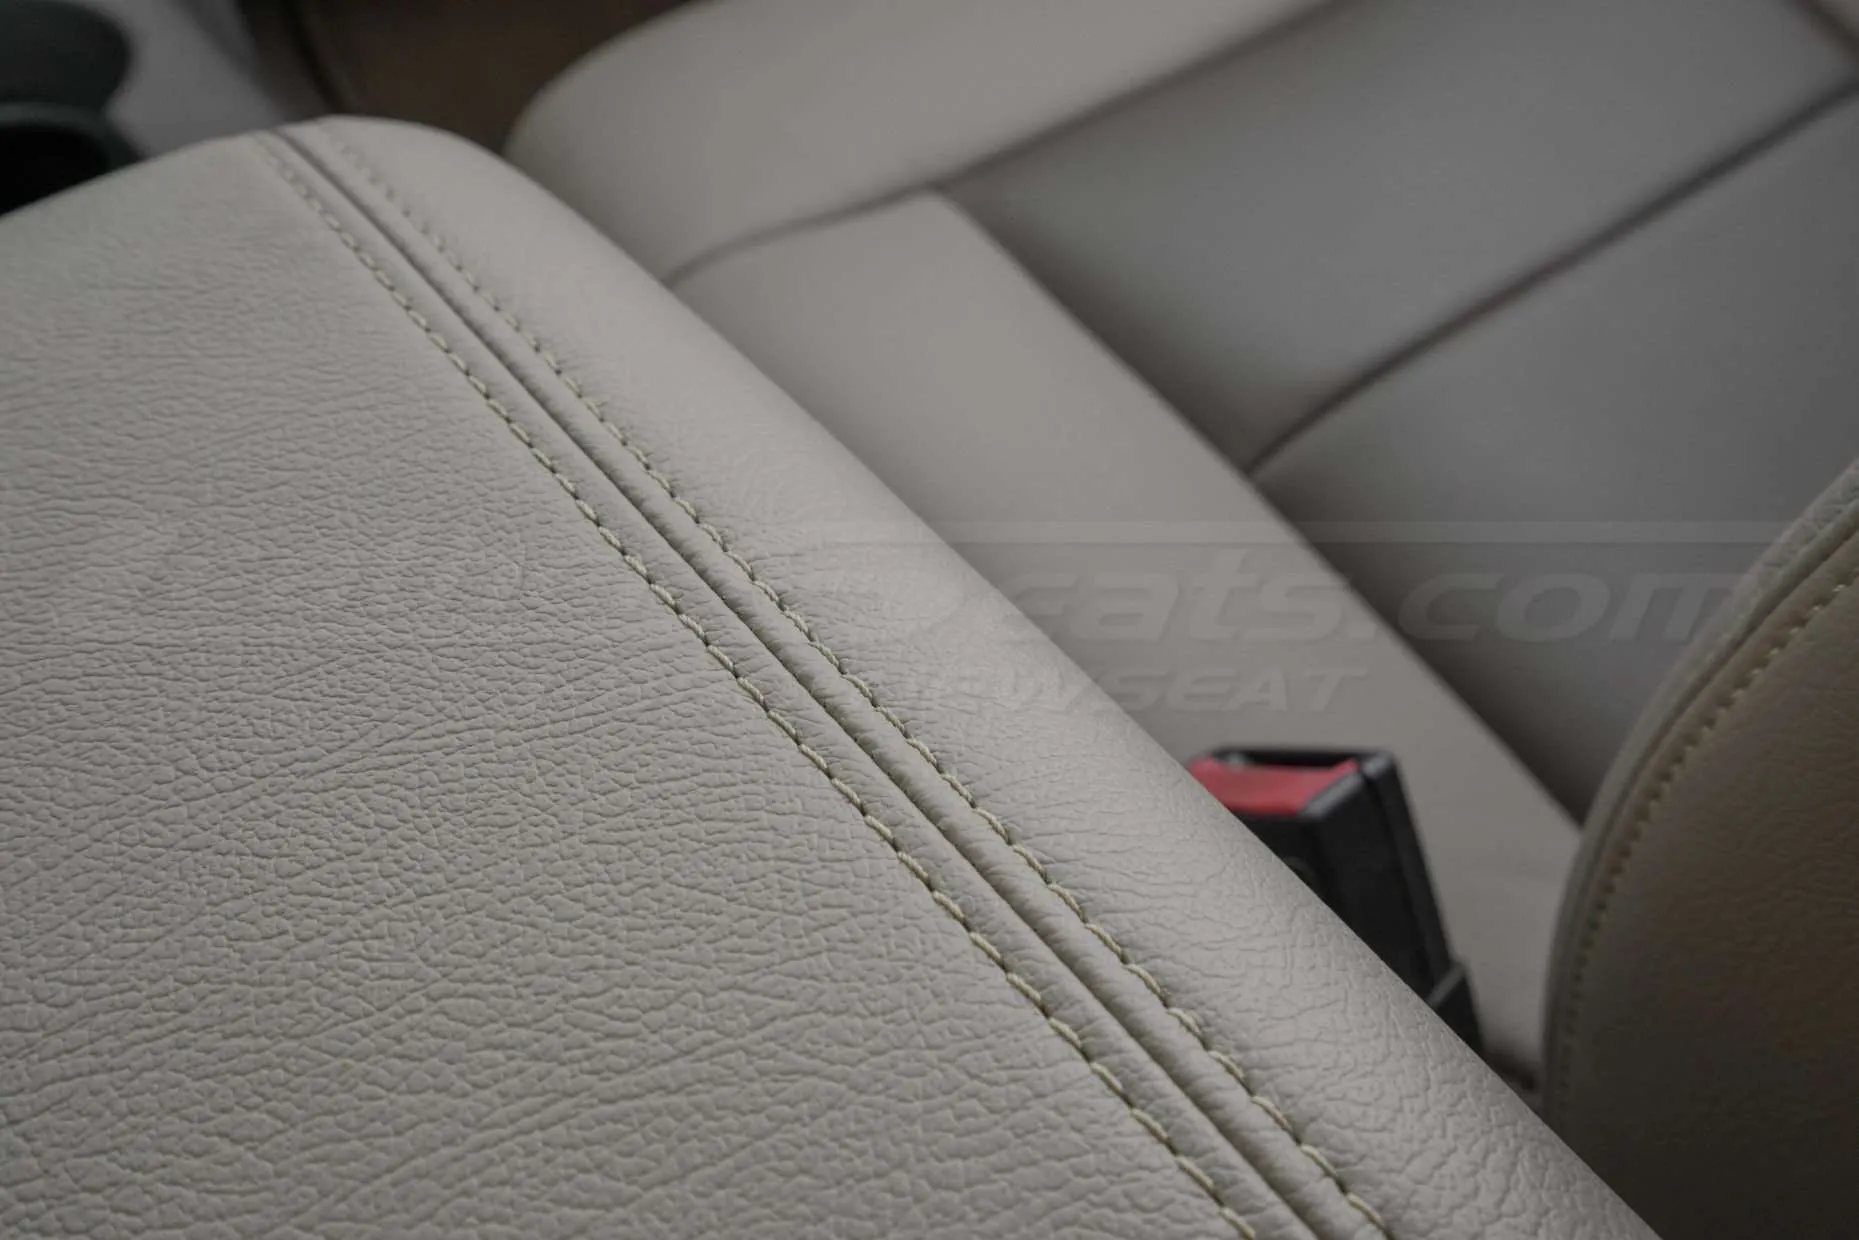 Matching double-stitching on leather console cover